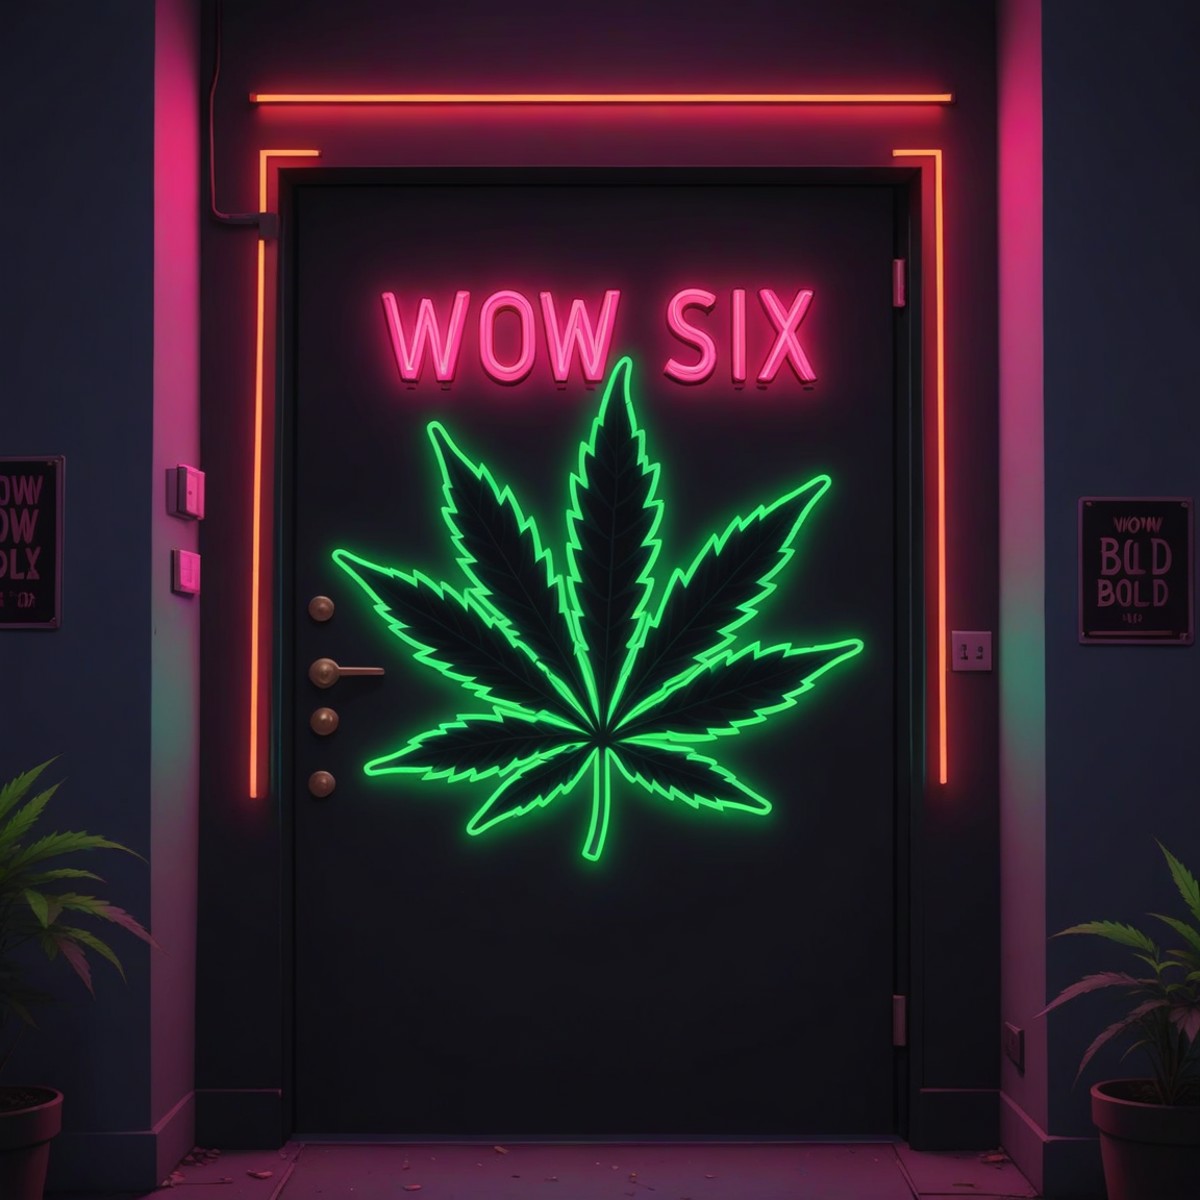 A door with cannabis leaf motif, neon sign reads "(WoW six)" in (bold text:1.35) above the leaf,